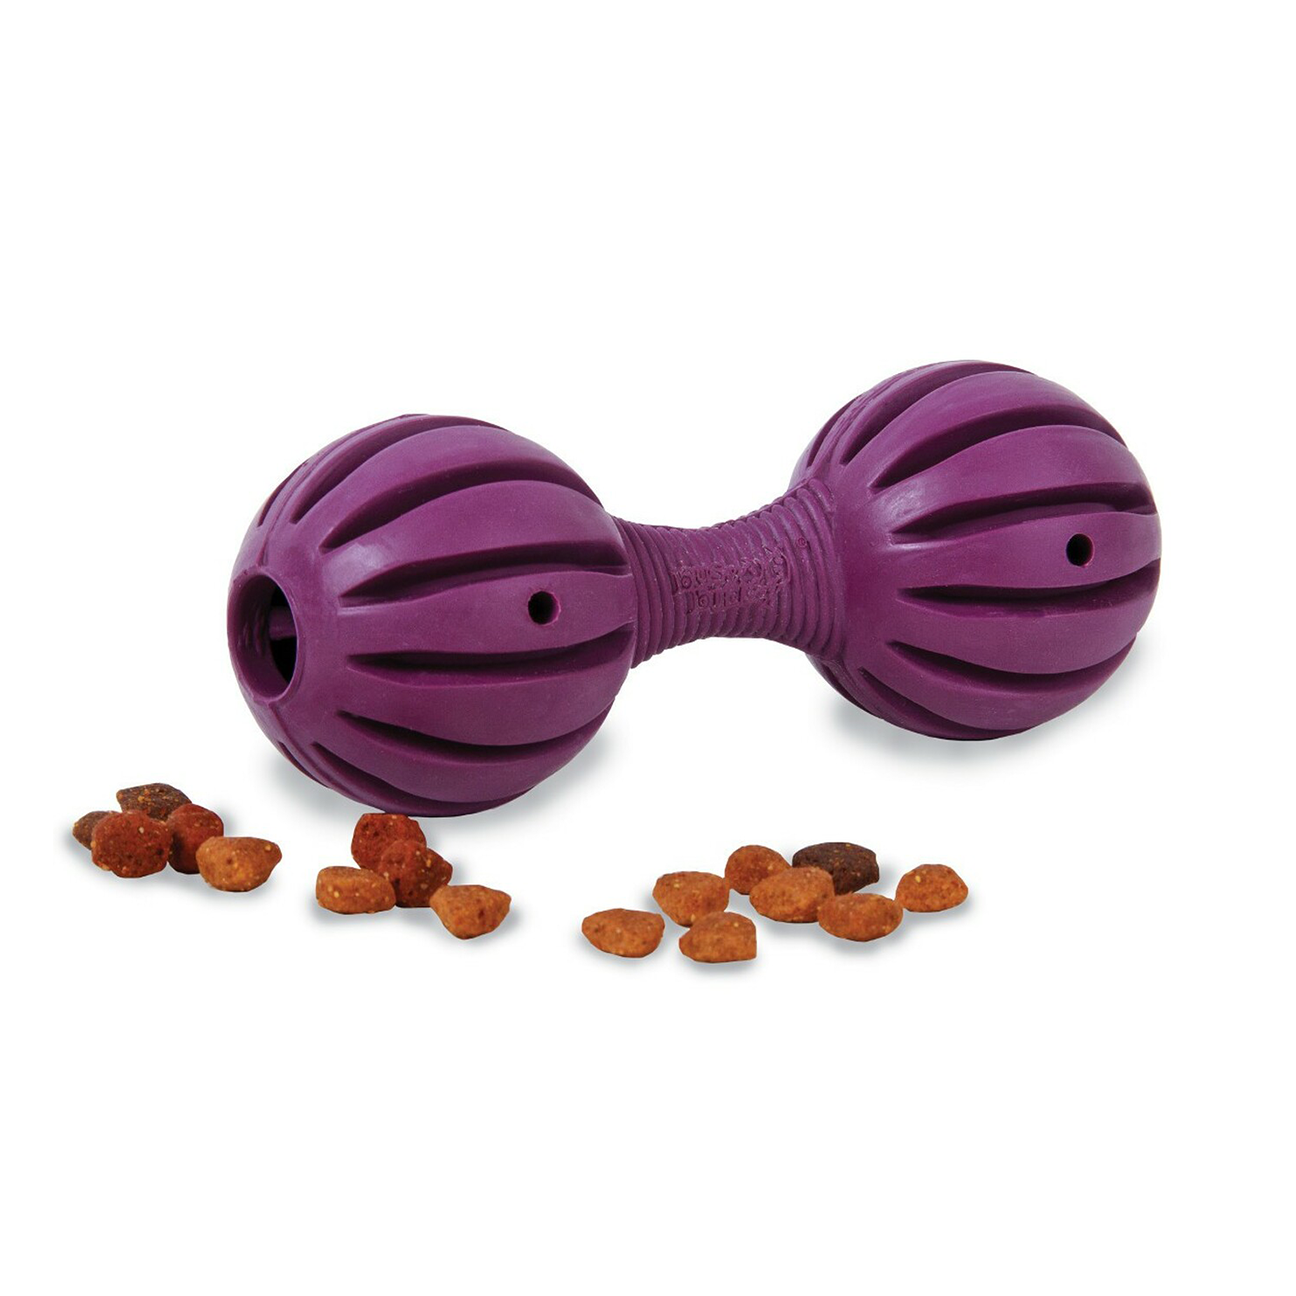 Busy Buddy - Waggle Treat Dispensing Toy - Henlo Pets